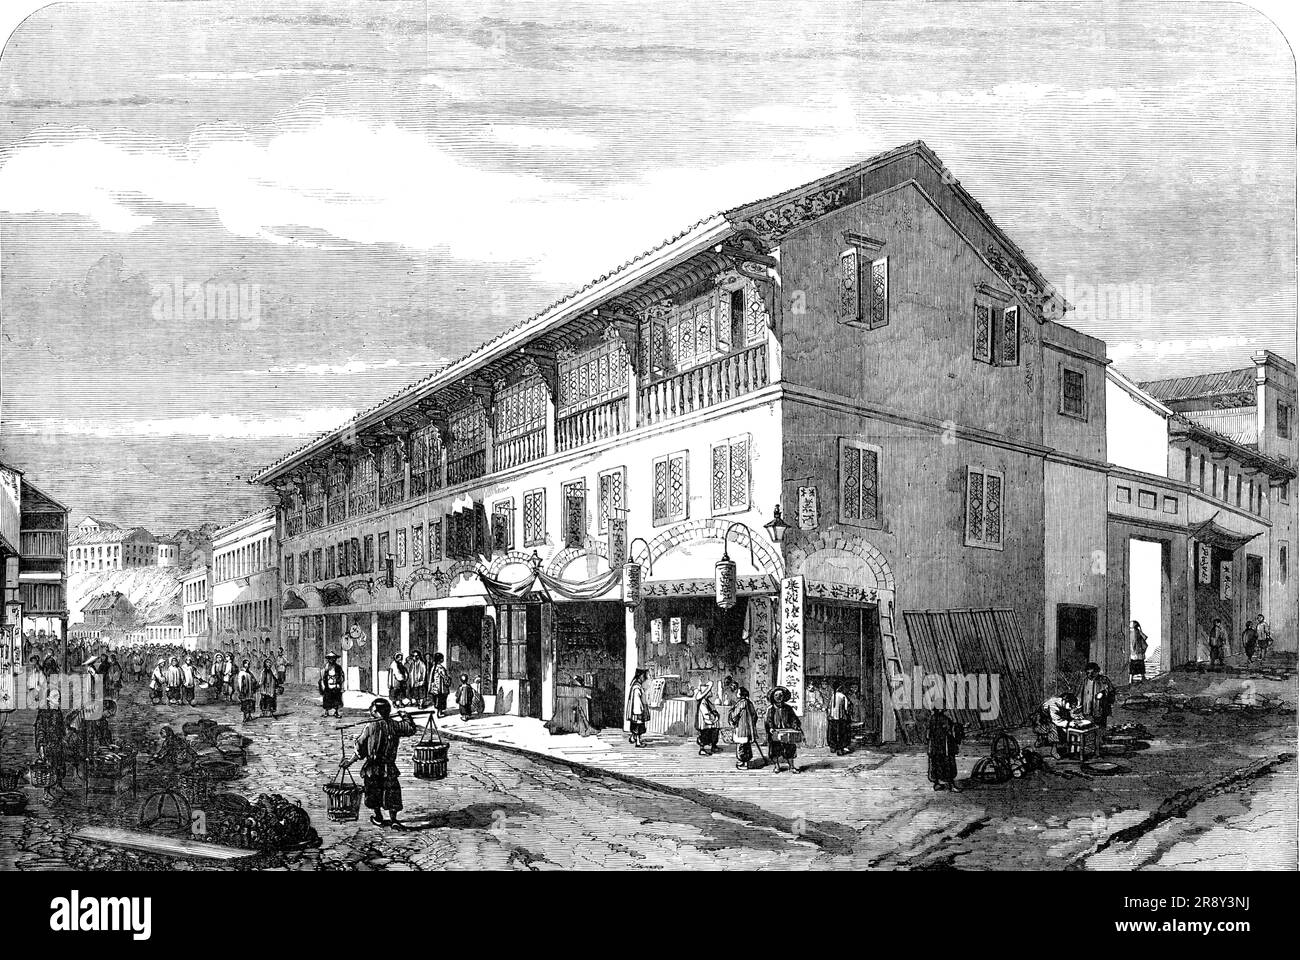 The War in China - Victoria Hong-Kong: Queen's-Road West, 1857. 'The interest attached to the town of Victoria, the capital of Hong-Kong, and the seat of the Colonial Government, has induced us to engrave the accompanying View of a principal street, from an original Sketch...Here the picturesqueness of the large Chinese building in the foreground, with its open bazaars, contrasts strangely with the plainness of the colonial structures beyond it. The labouring classes and small traders are chiefly Chinese, who are ever on the alert for gain. The bazaars invite the passing stranger in every stre Stock Photo